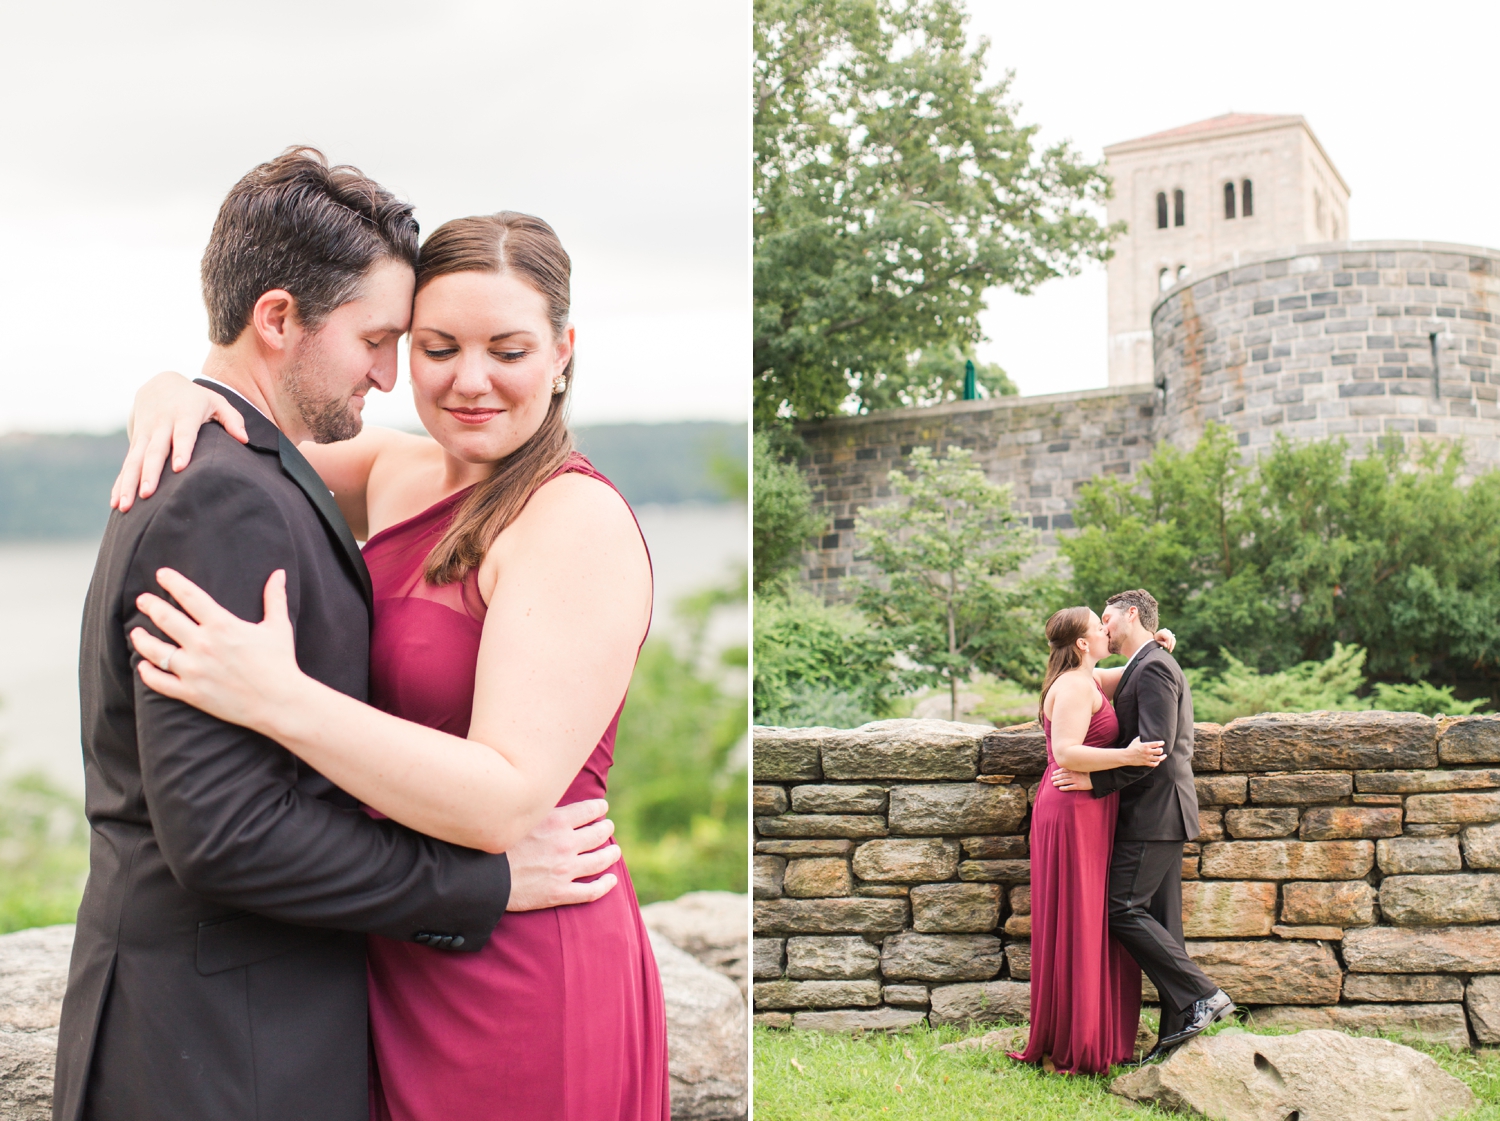 the-met-cloisters-engagement-session-manhattan-new-york-city-connecticut-wedding-photographer-shaina-lee-photography-photo